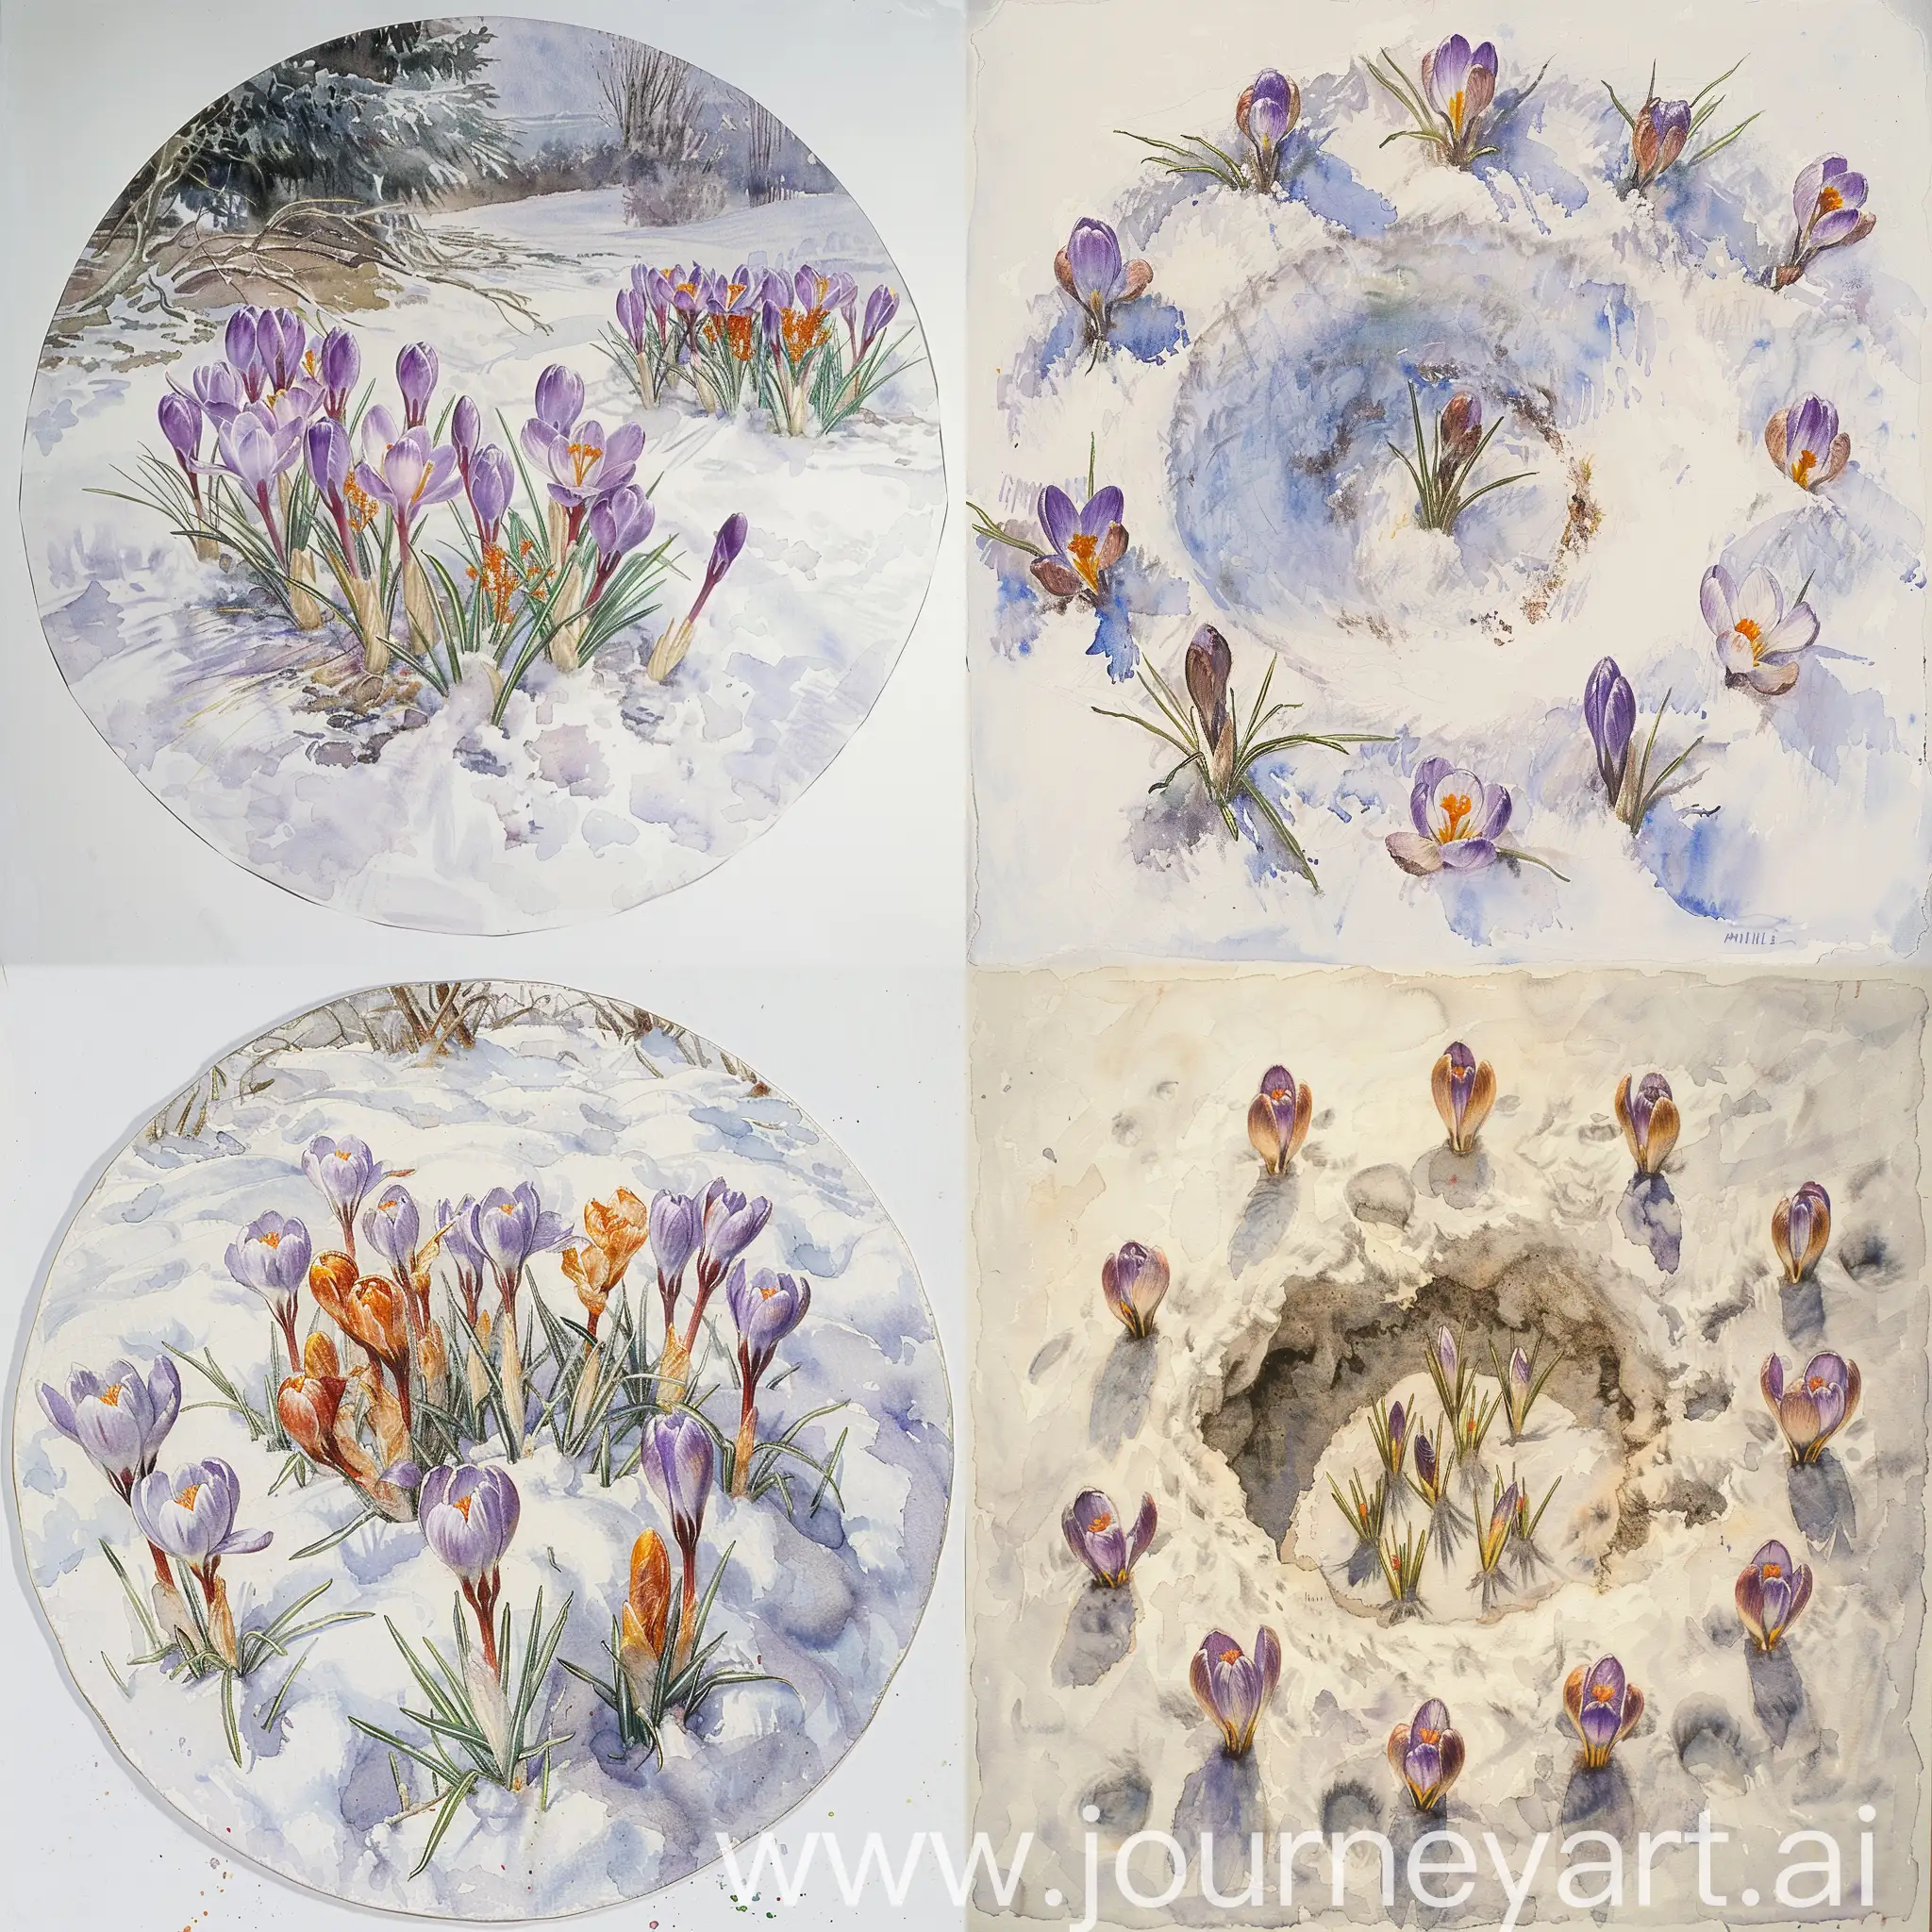 Vibrant-Crocuses-in-Snow-Classical-Watercolor-Painting-by-Millais